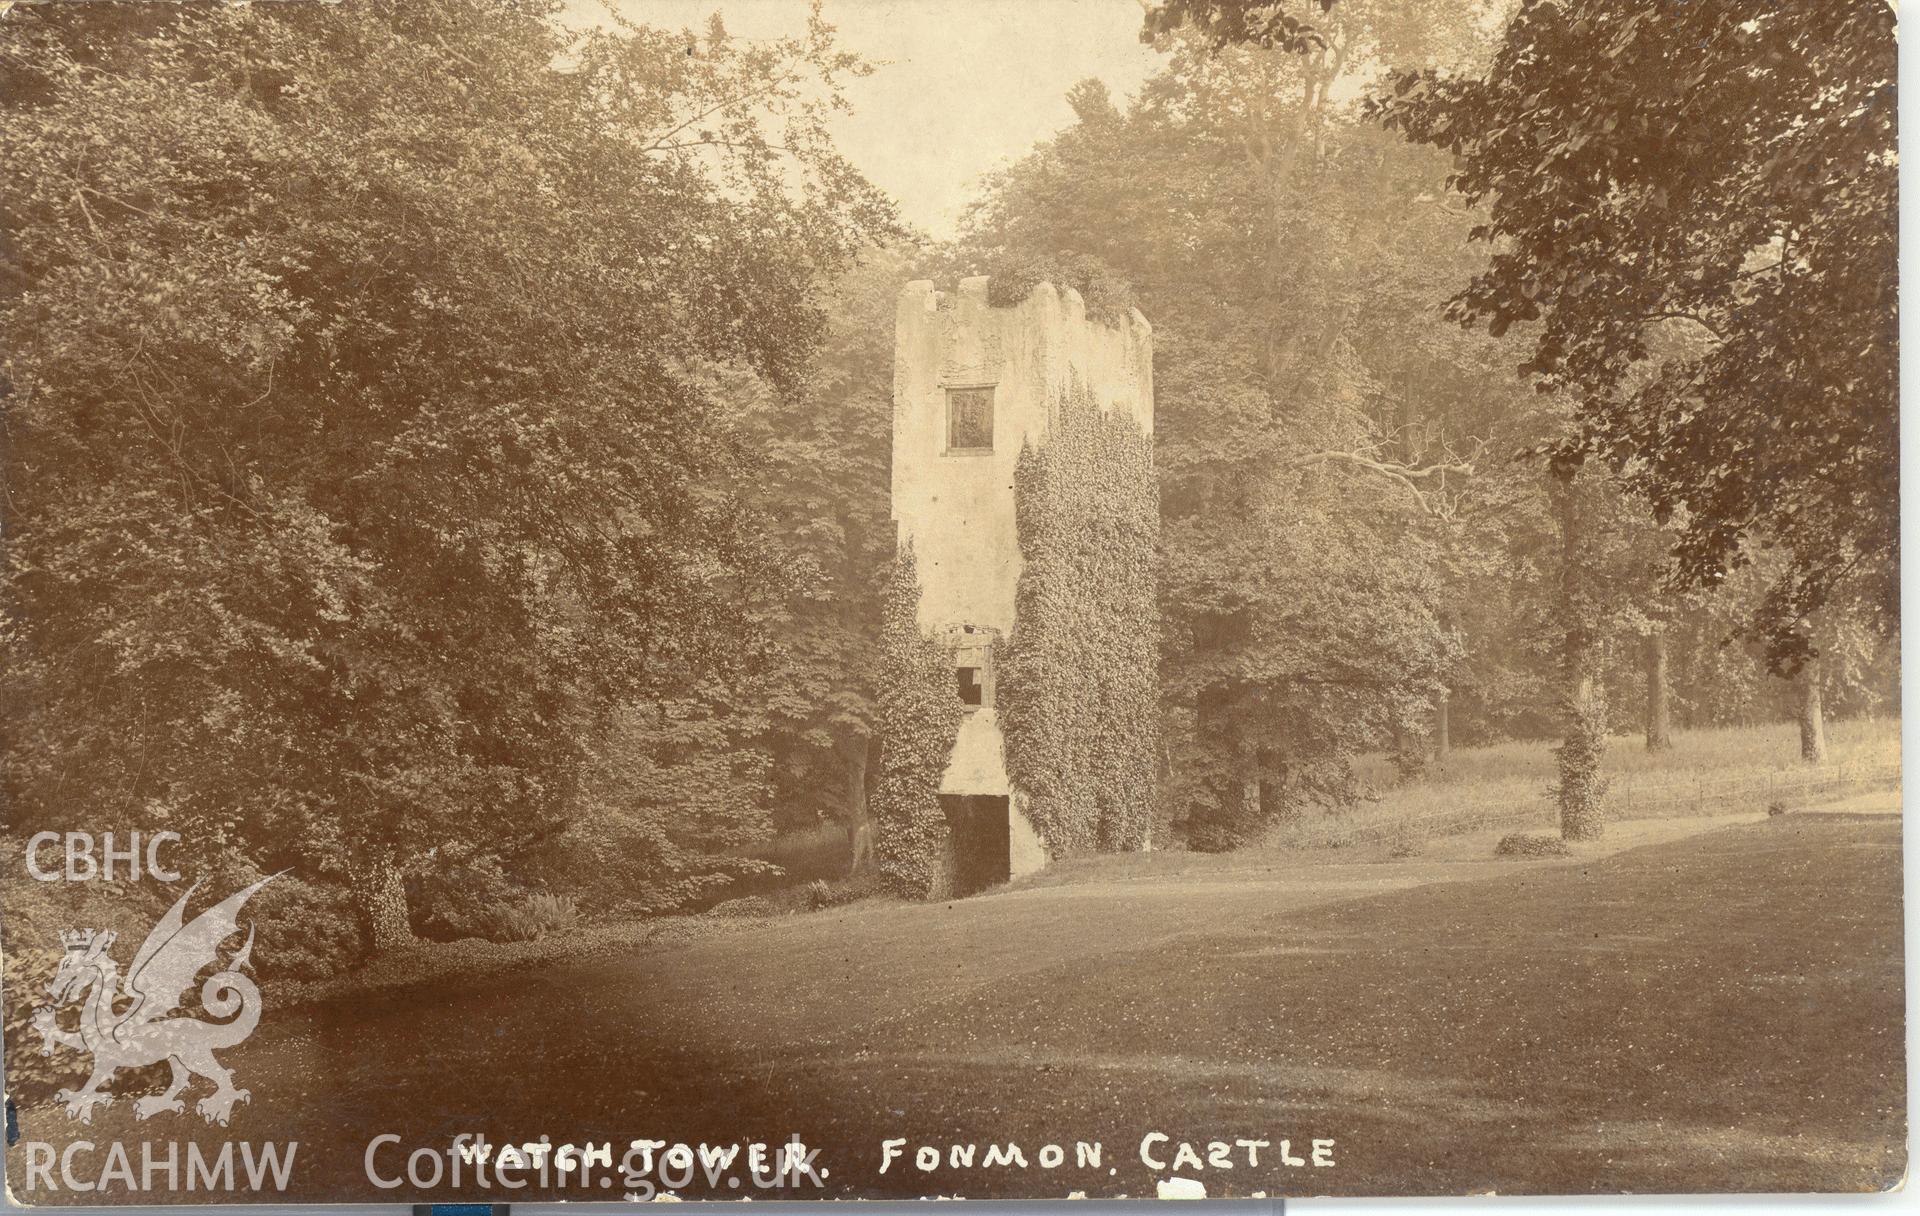 Digitised postcard image of Fonmon Castle, Rhoose showing watchtower and grounds. Produced by Parks and Gardens Data Services, from an original item in the Peter Davis Collection at Parks and Gardens UK. We hold only web-resolution images of this collection, suitable for viewing on screen and for research purposes only. We do not hold the original images, or publication quality scans.